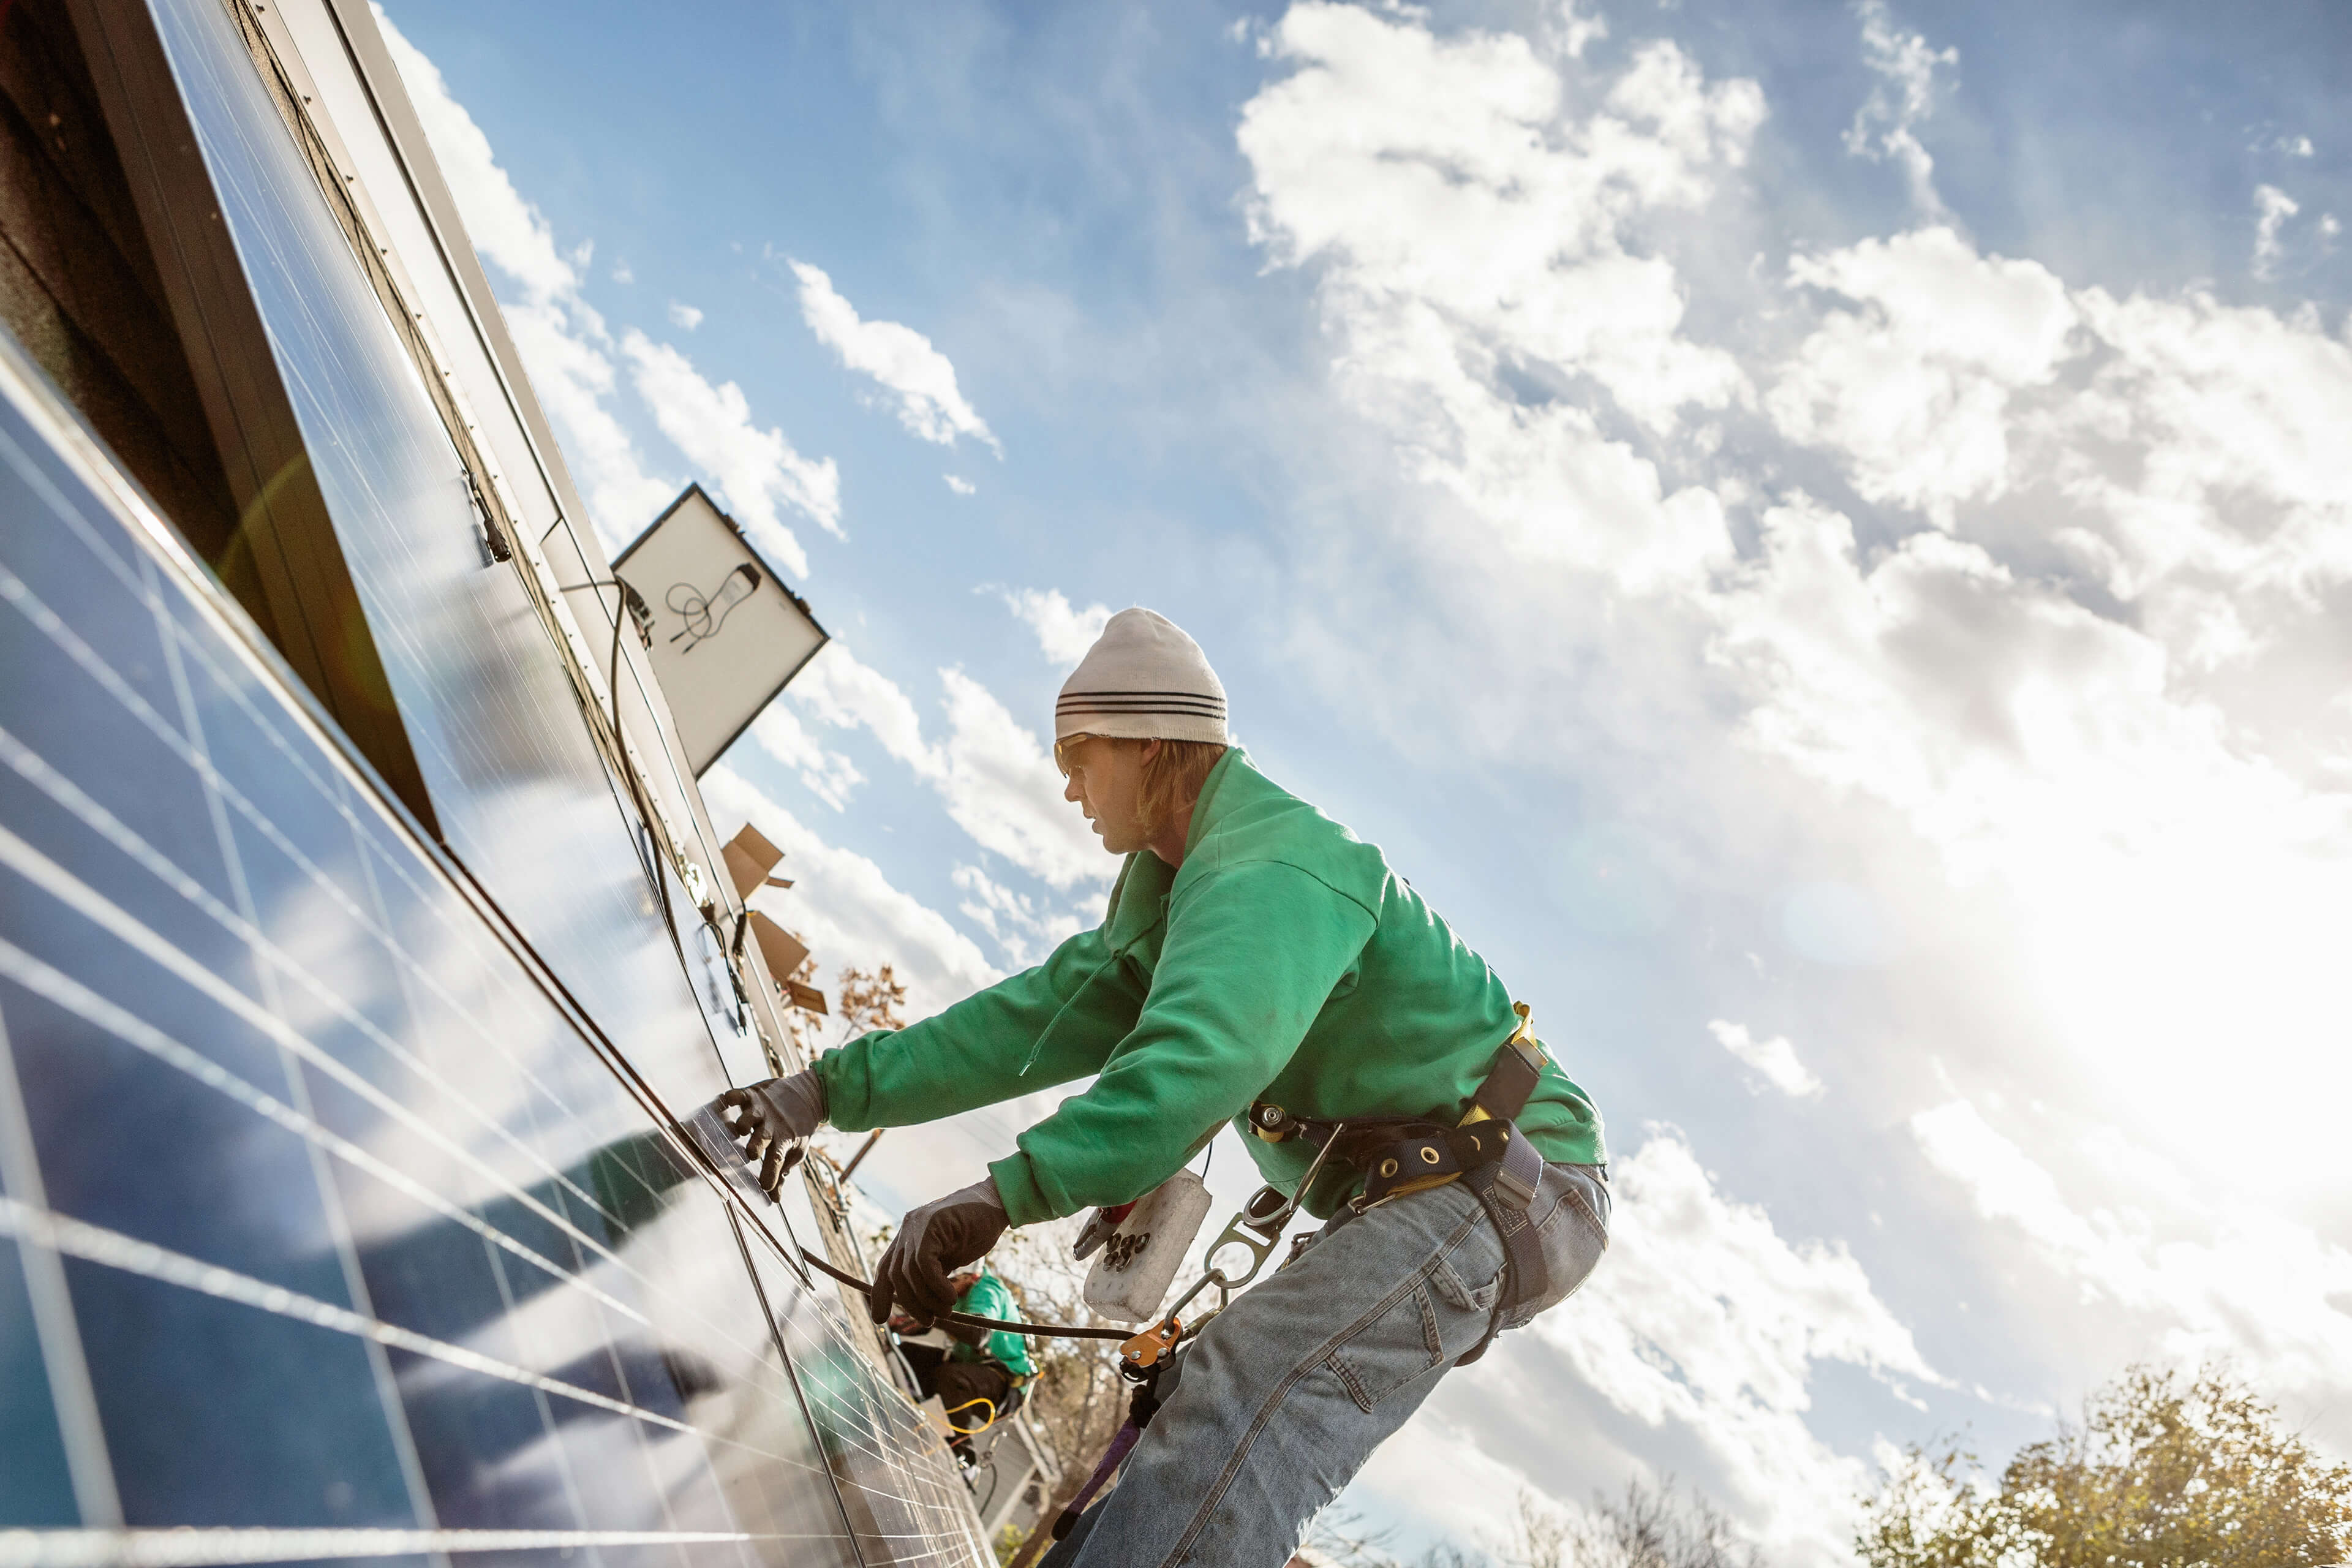 Construction crew member installing a solar panel on a house image